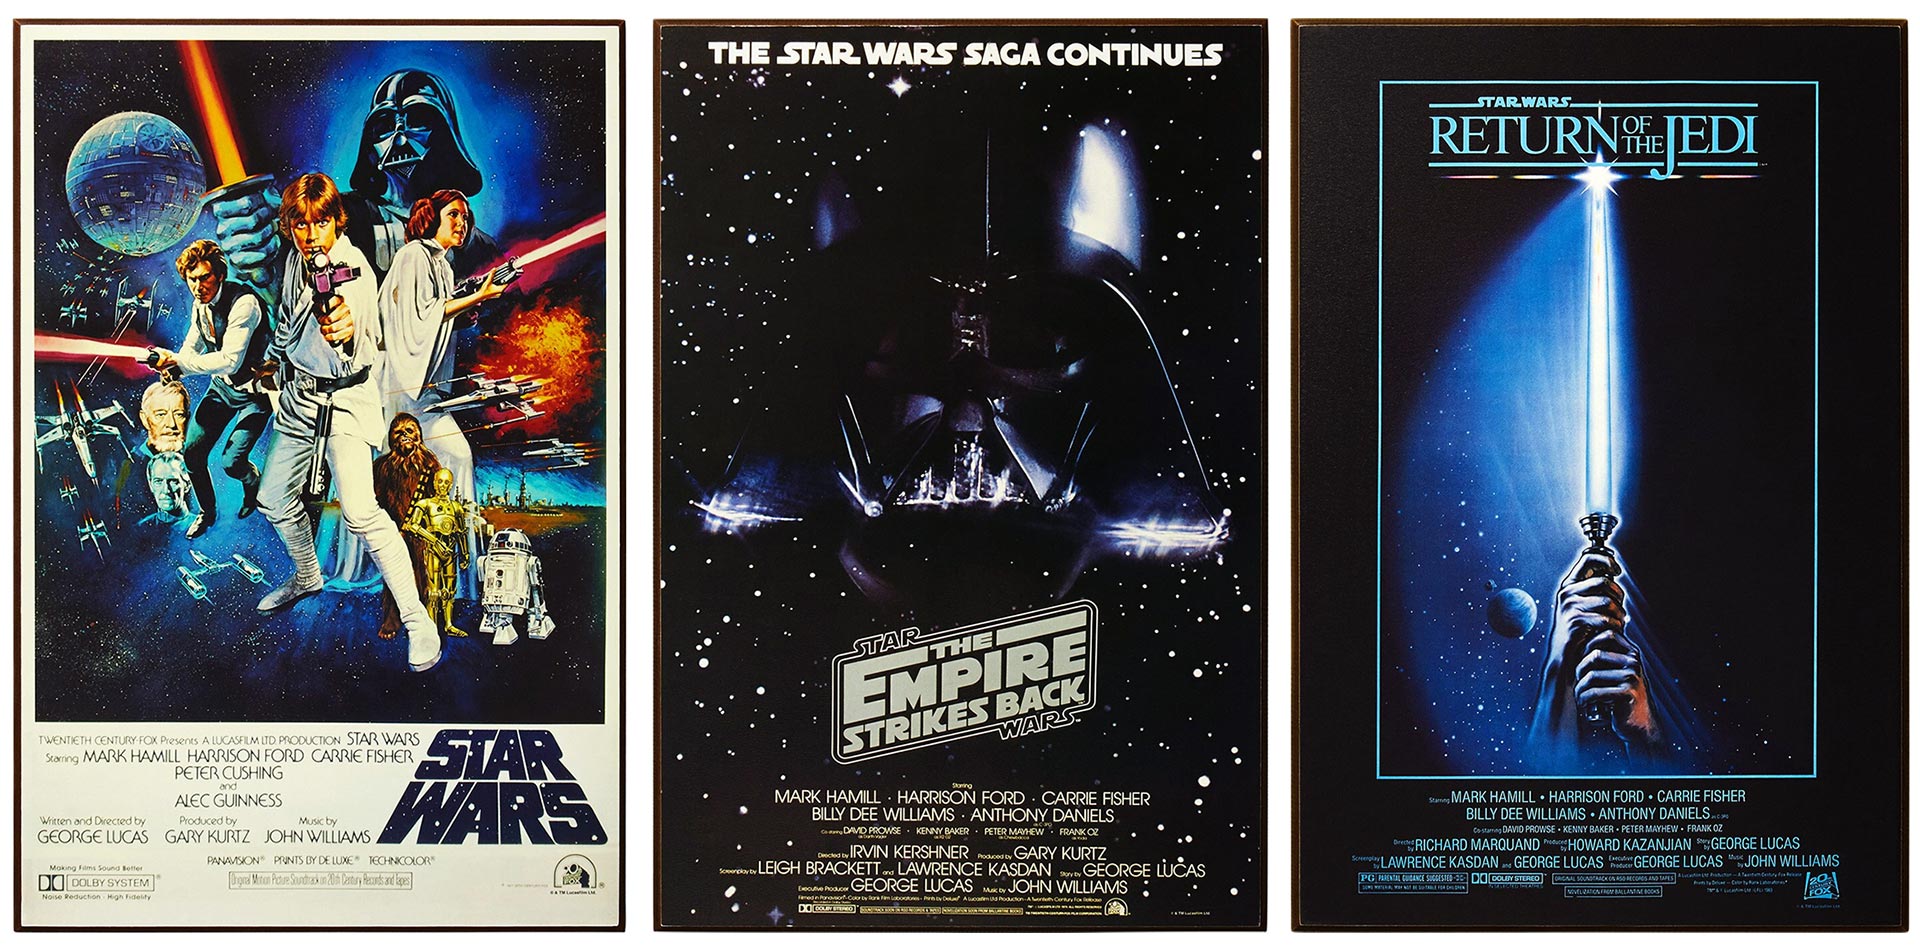 A collection of vintage Star Wars posters from around the world